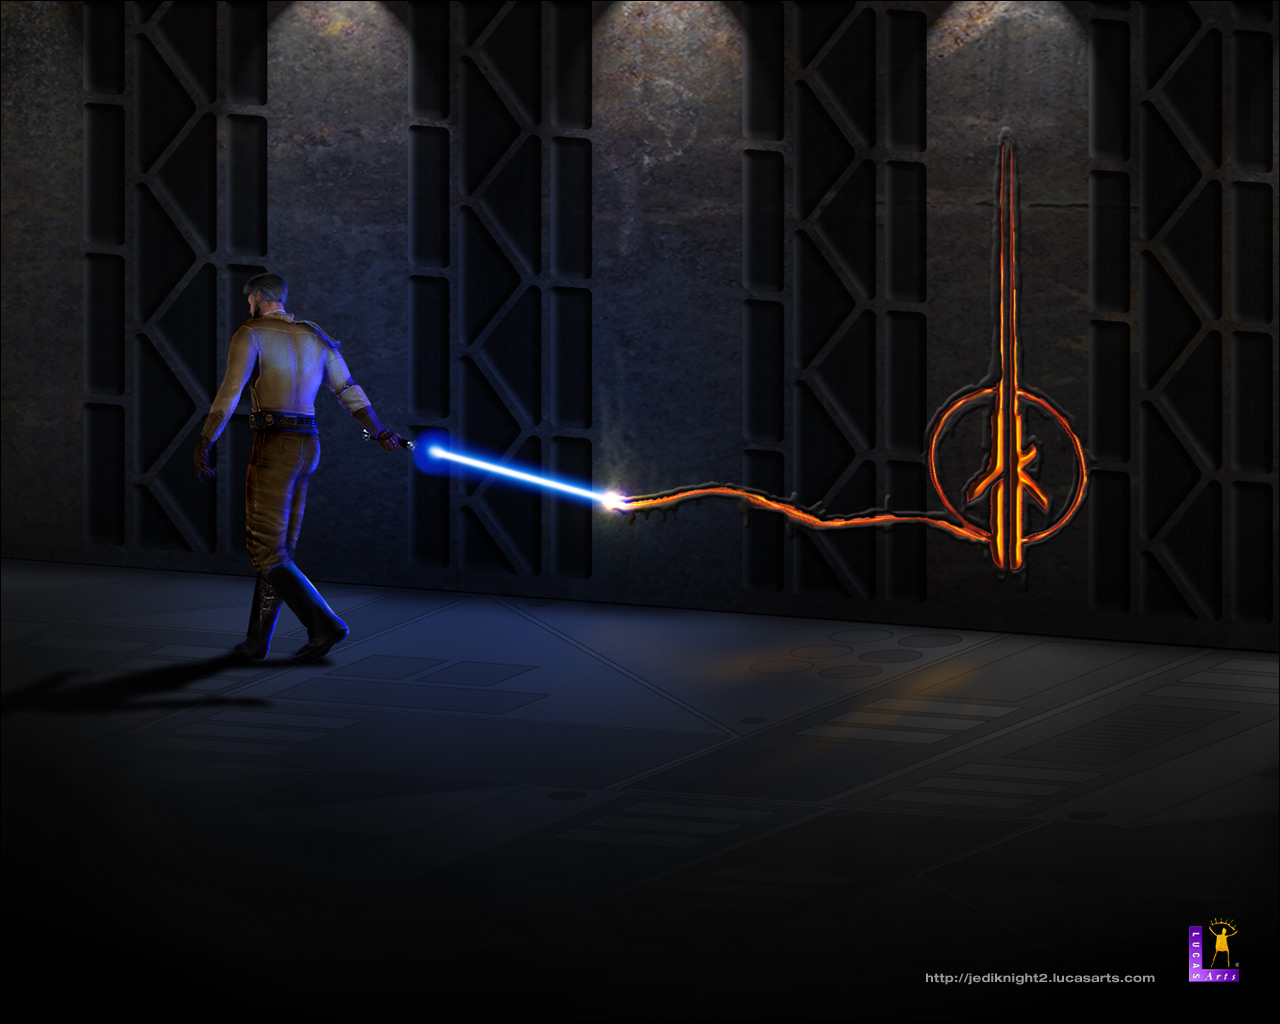 Working-Linux-Port-of-Star-Wars-Jedi-Knight-II-Jedi-Outcast-Is-Out-Download-and-Play-2.jpg